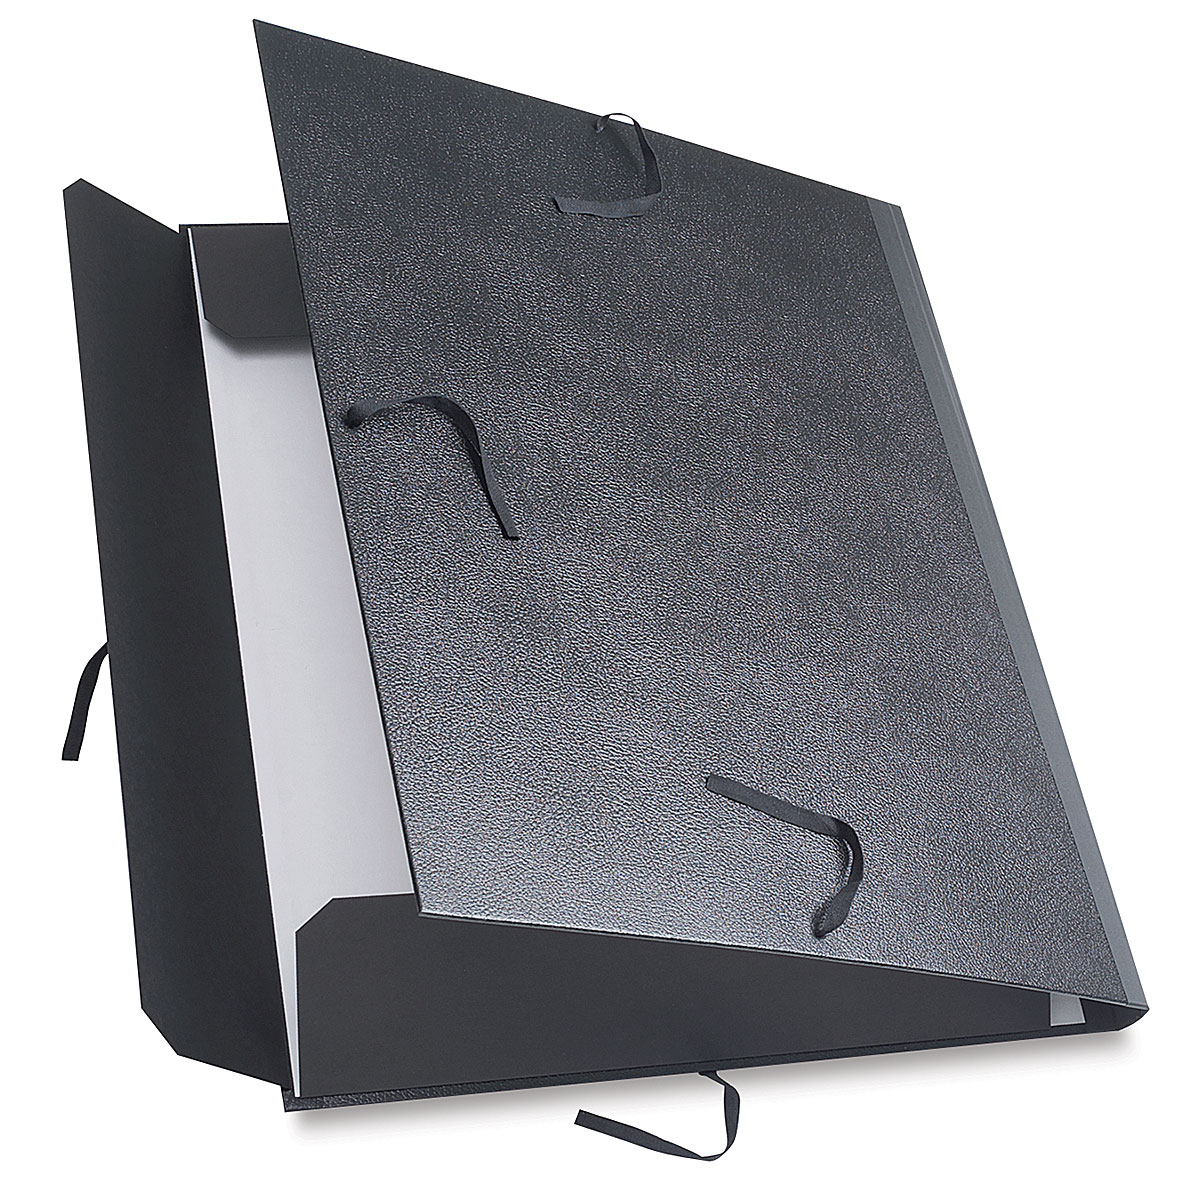 471301418 14 x 18 inches Daler-Rowney Cachet Classic Portfolio Black Hard Cover with Cloth Ties 